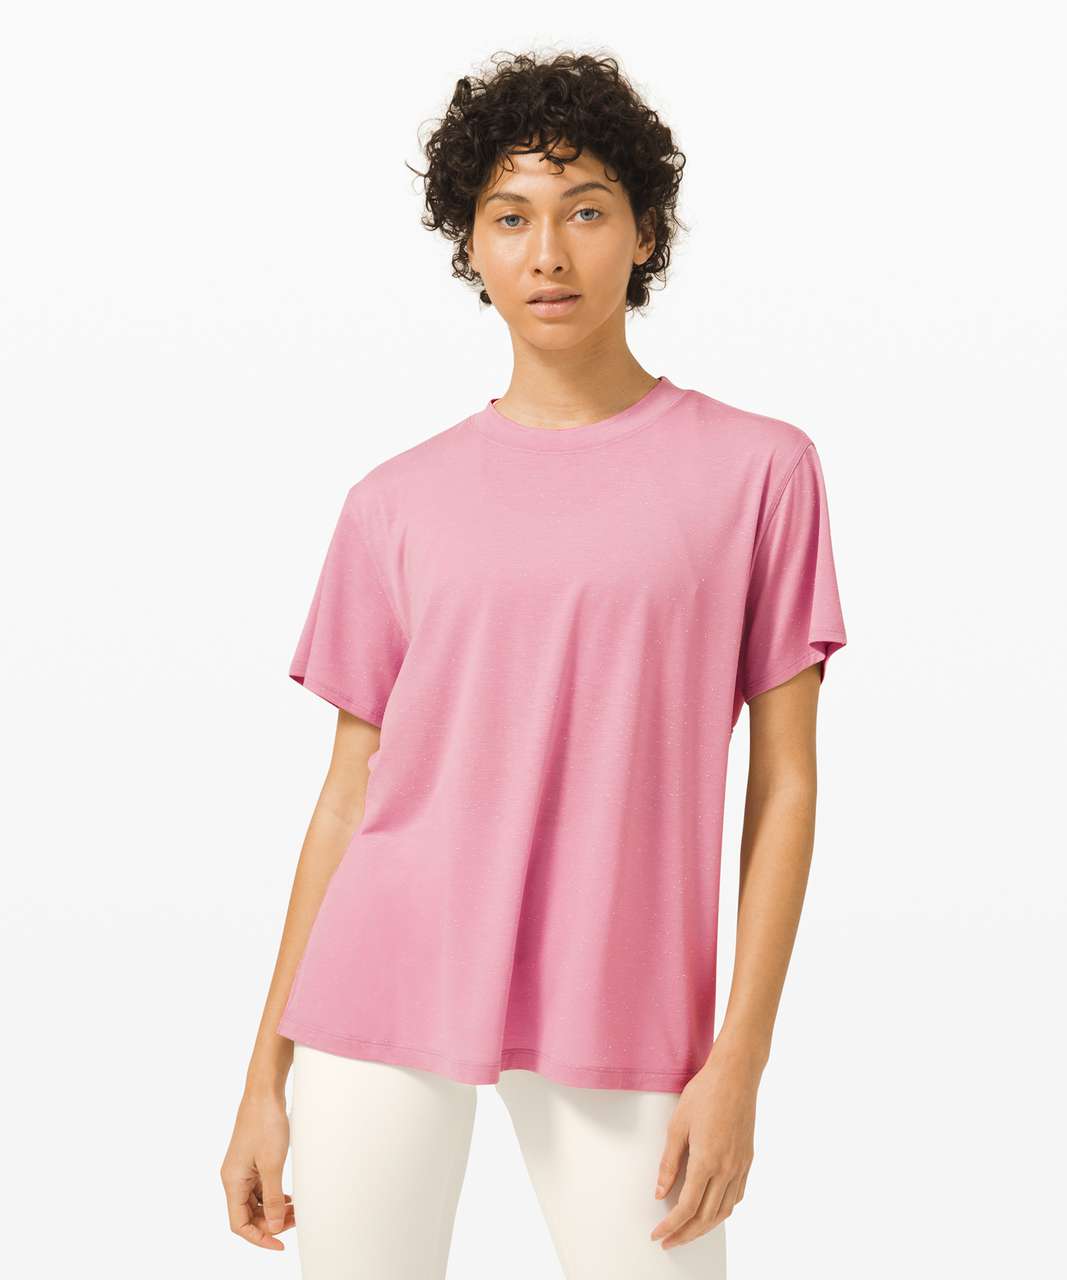 Lululemon All Yours Boyfriend Tee - Pink Taupe / White